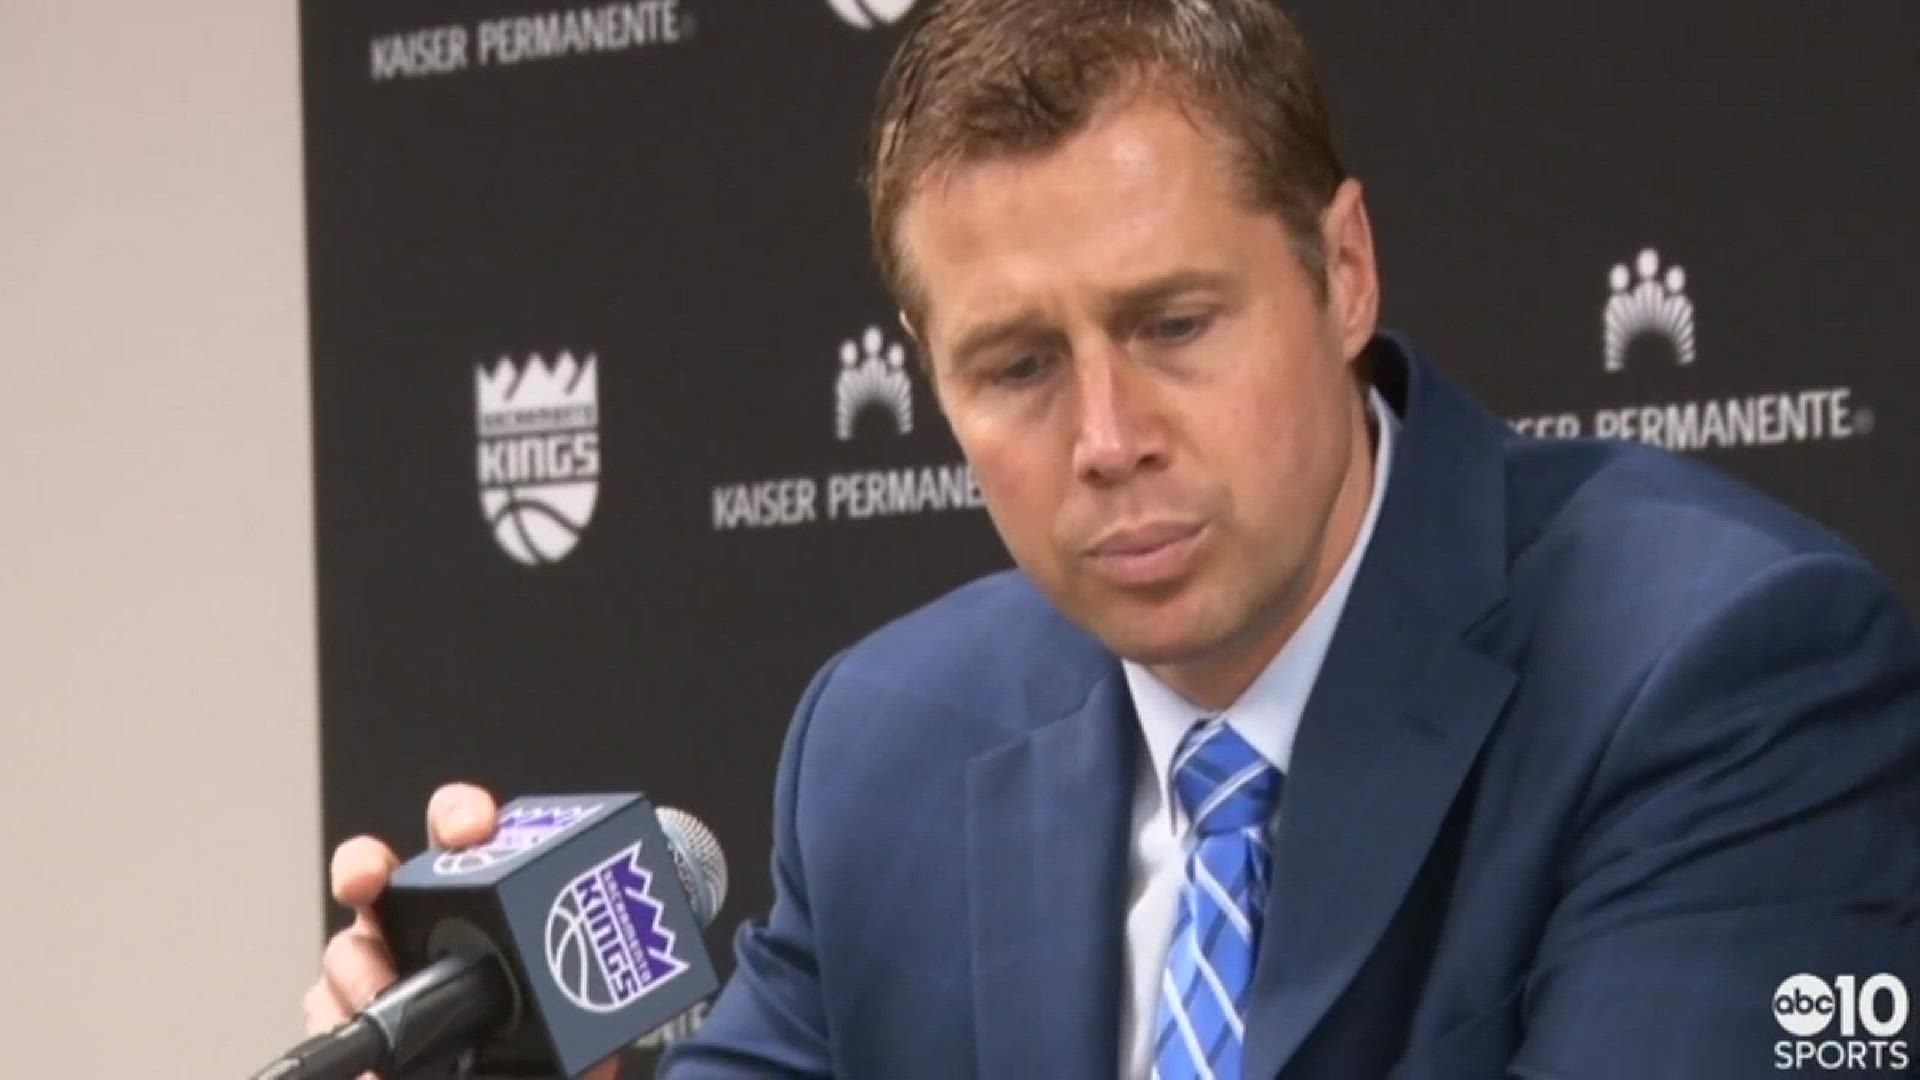 Sacramento Kings head coach Dave Joeger talks about notching his 200th career NBA victory on Friday night with the win over the Orlando Magic.